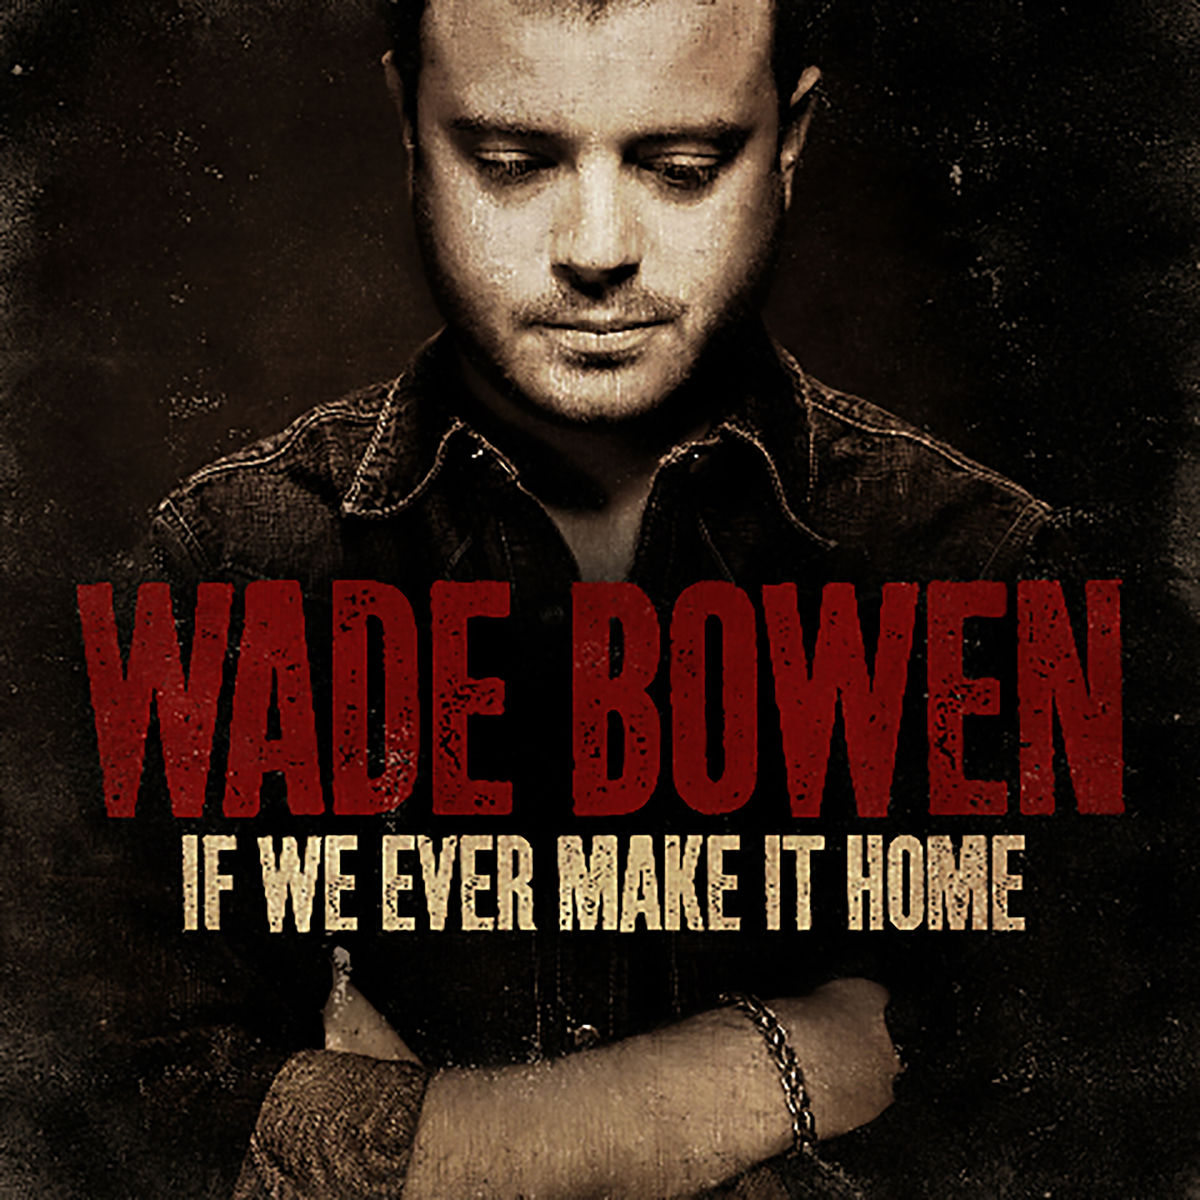 Wade Bowen - If We Ever Make It Home (2008/FLAC+MP3)